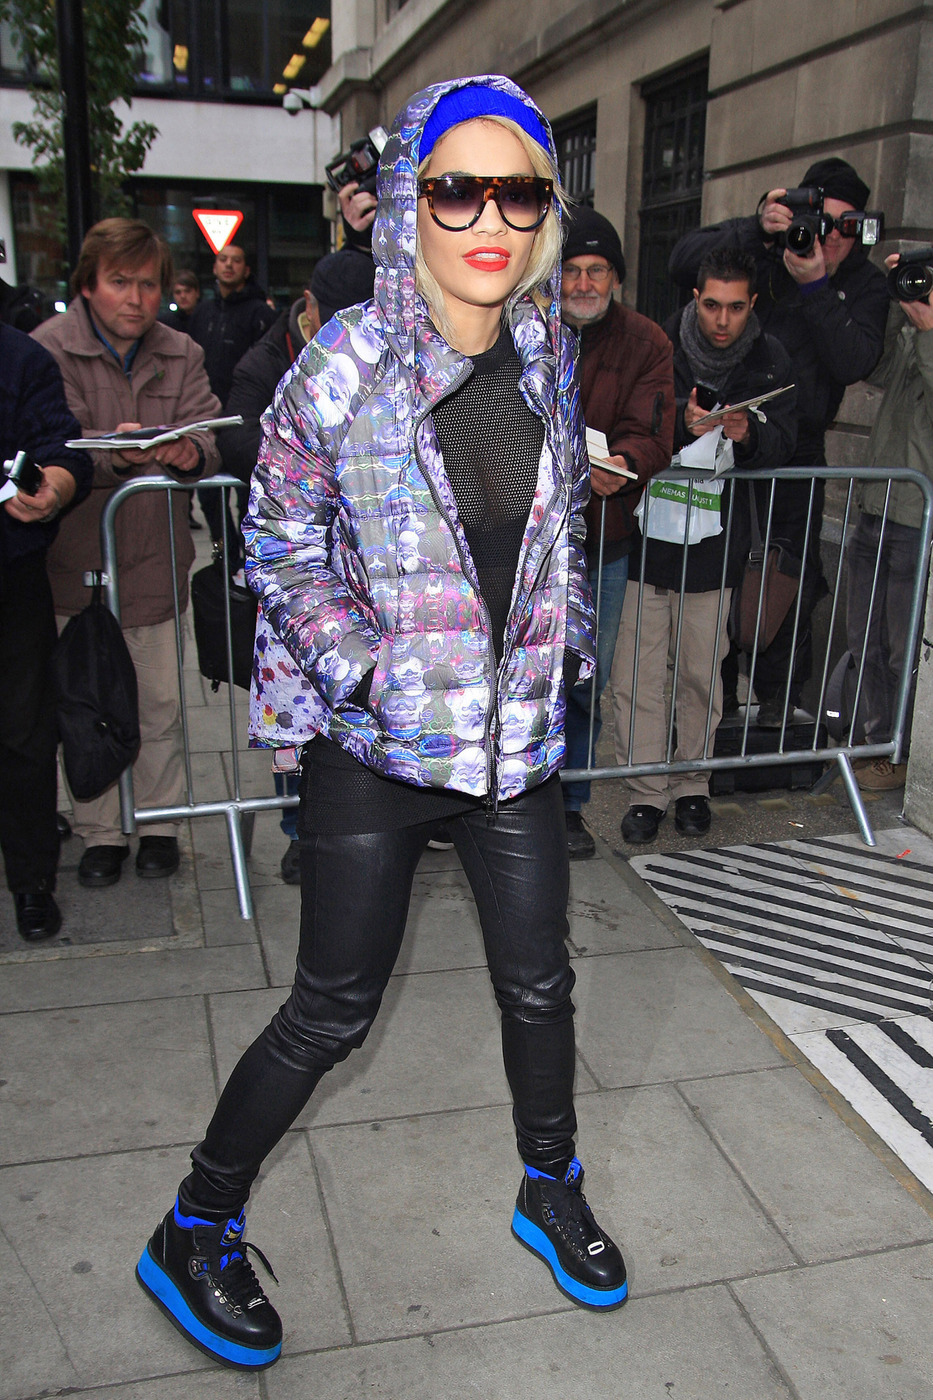 Rita Ora, wearing a very revealing see-through mesh top and black leather pants, makes her way into the BBC Radio 2 studios in London